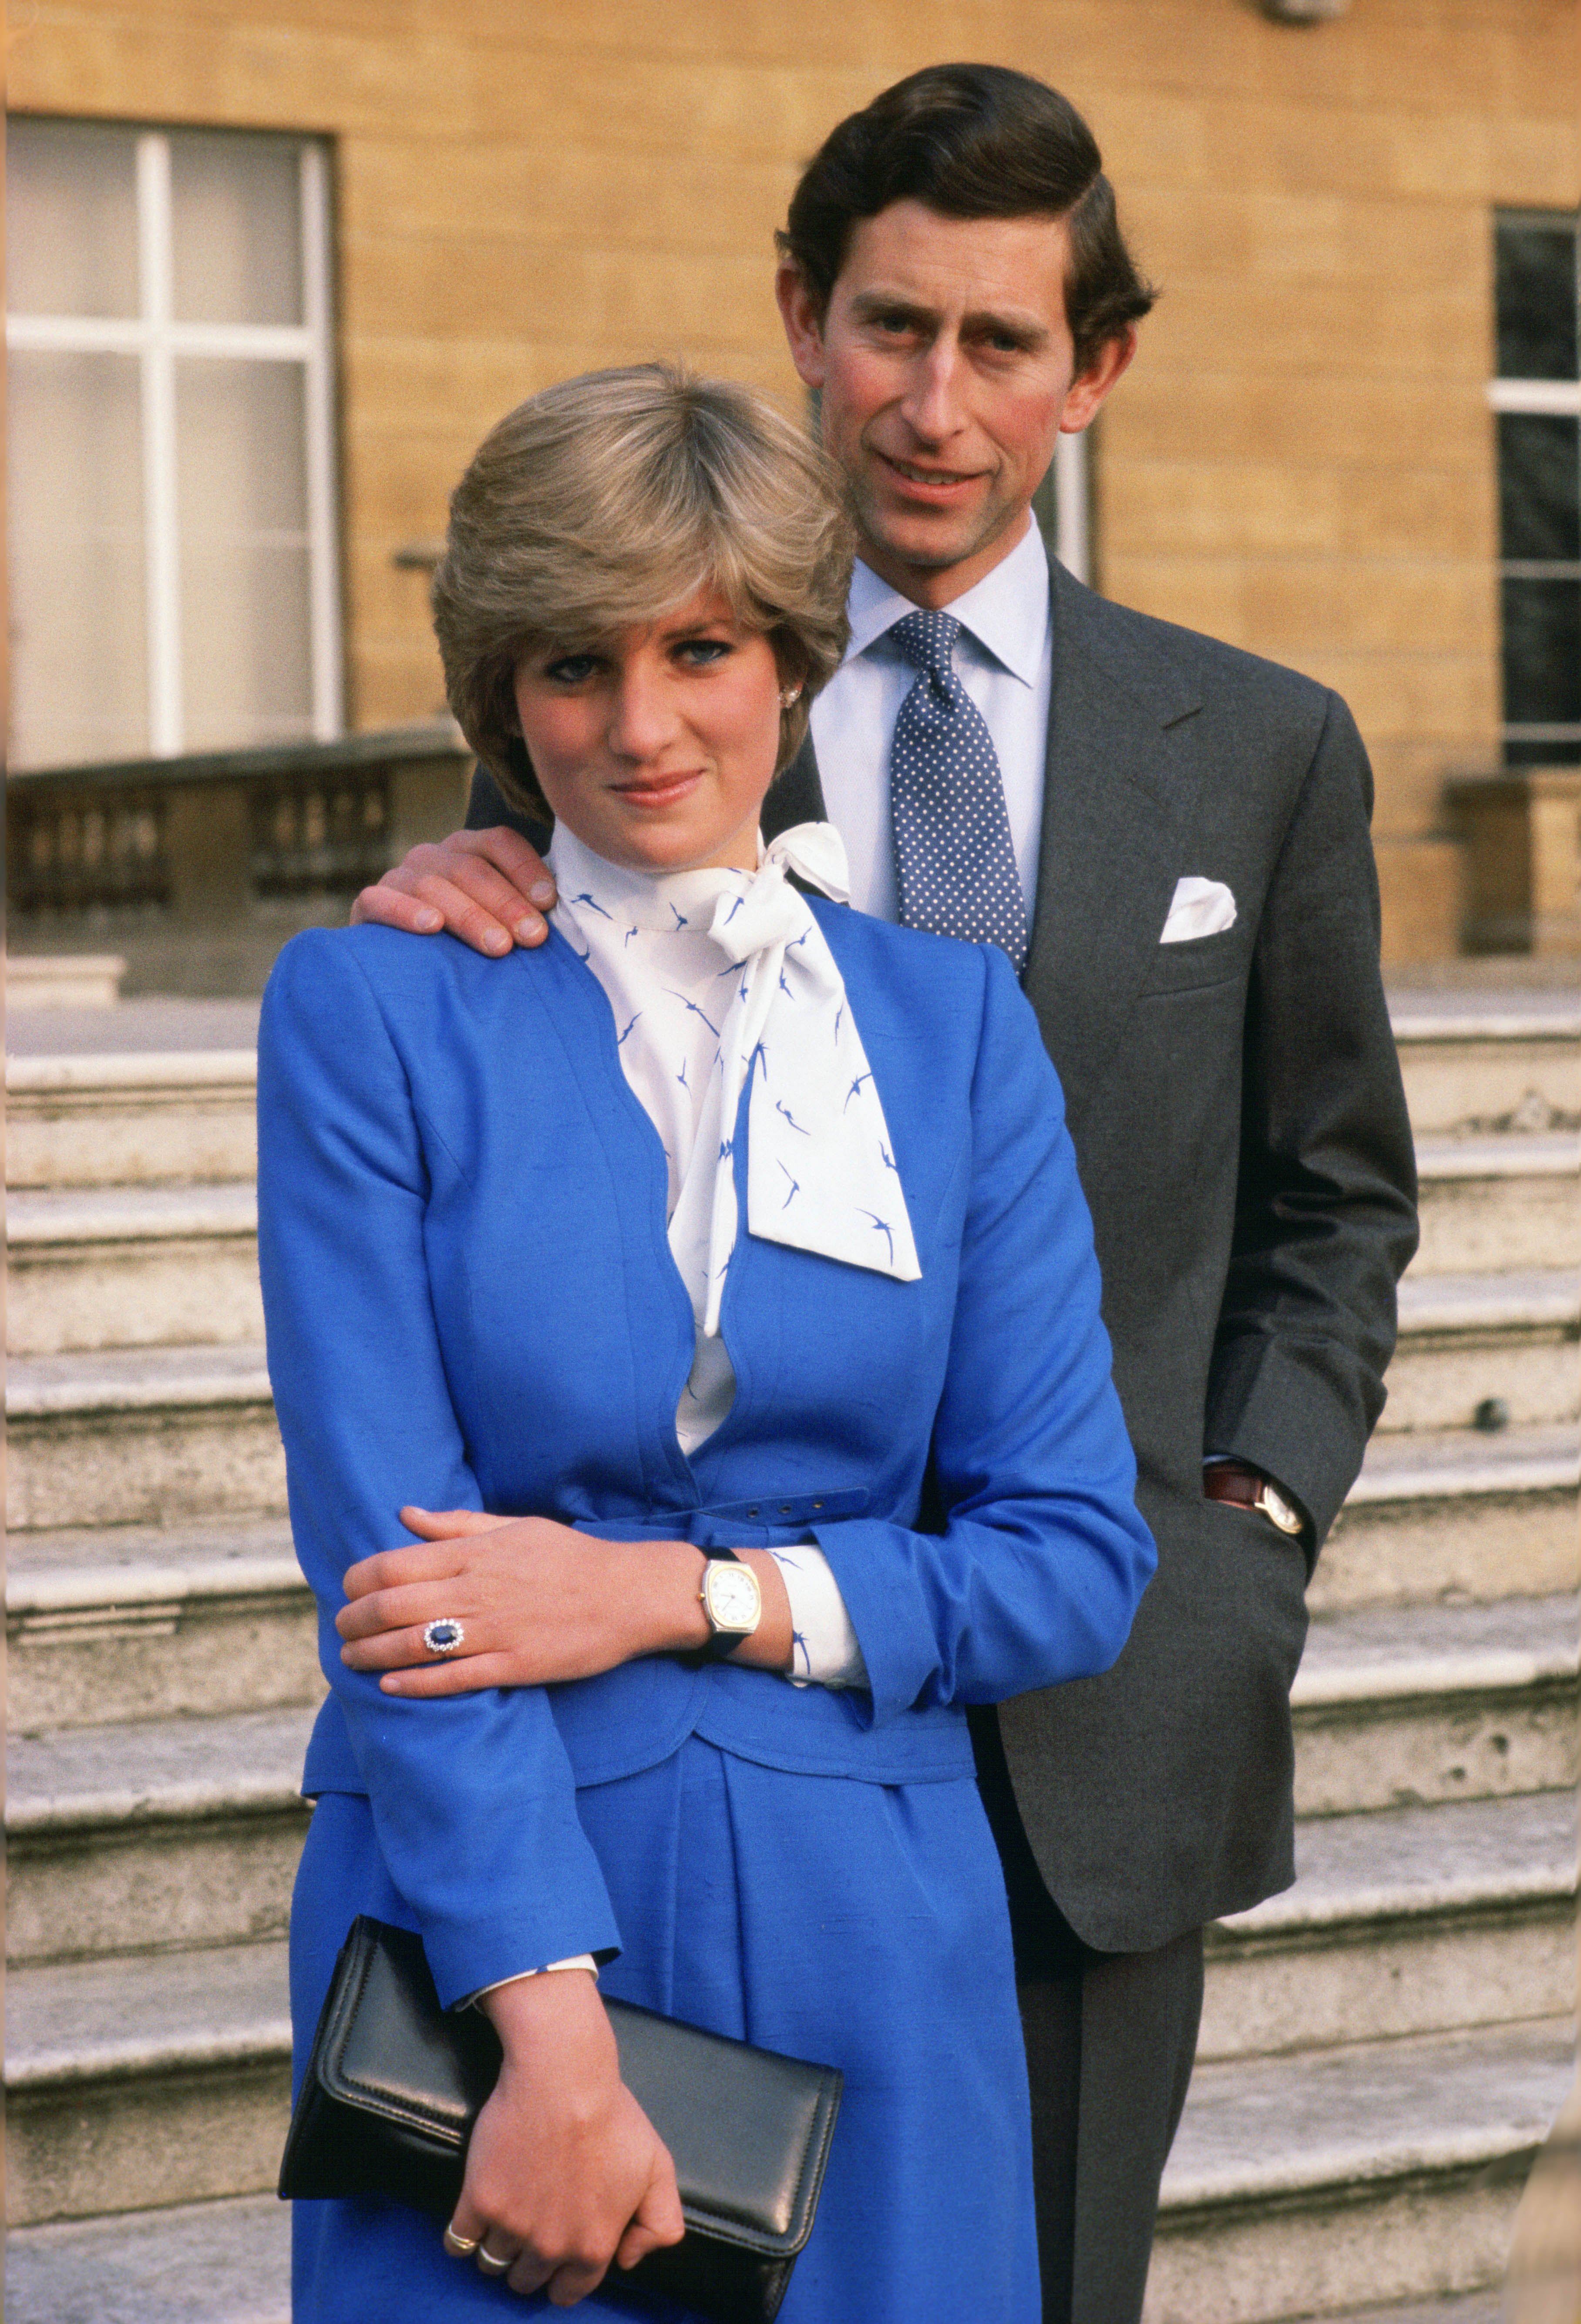 Princess Diana and Prince Charles pose after announcing their engagement in the grounds of Buckingham Palace on February 24, 1981. | Source: Getty Images